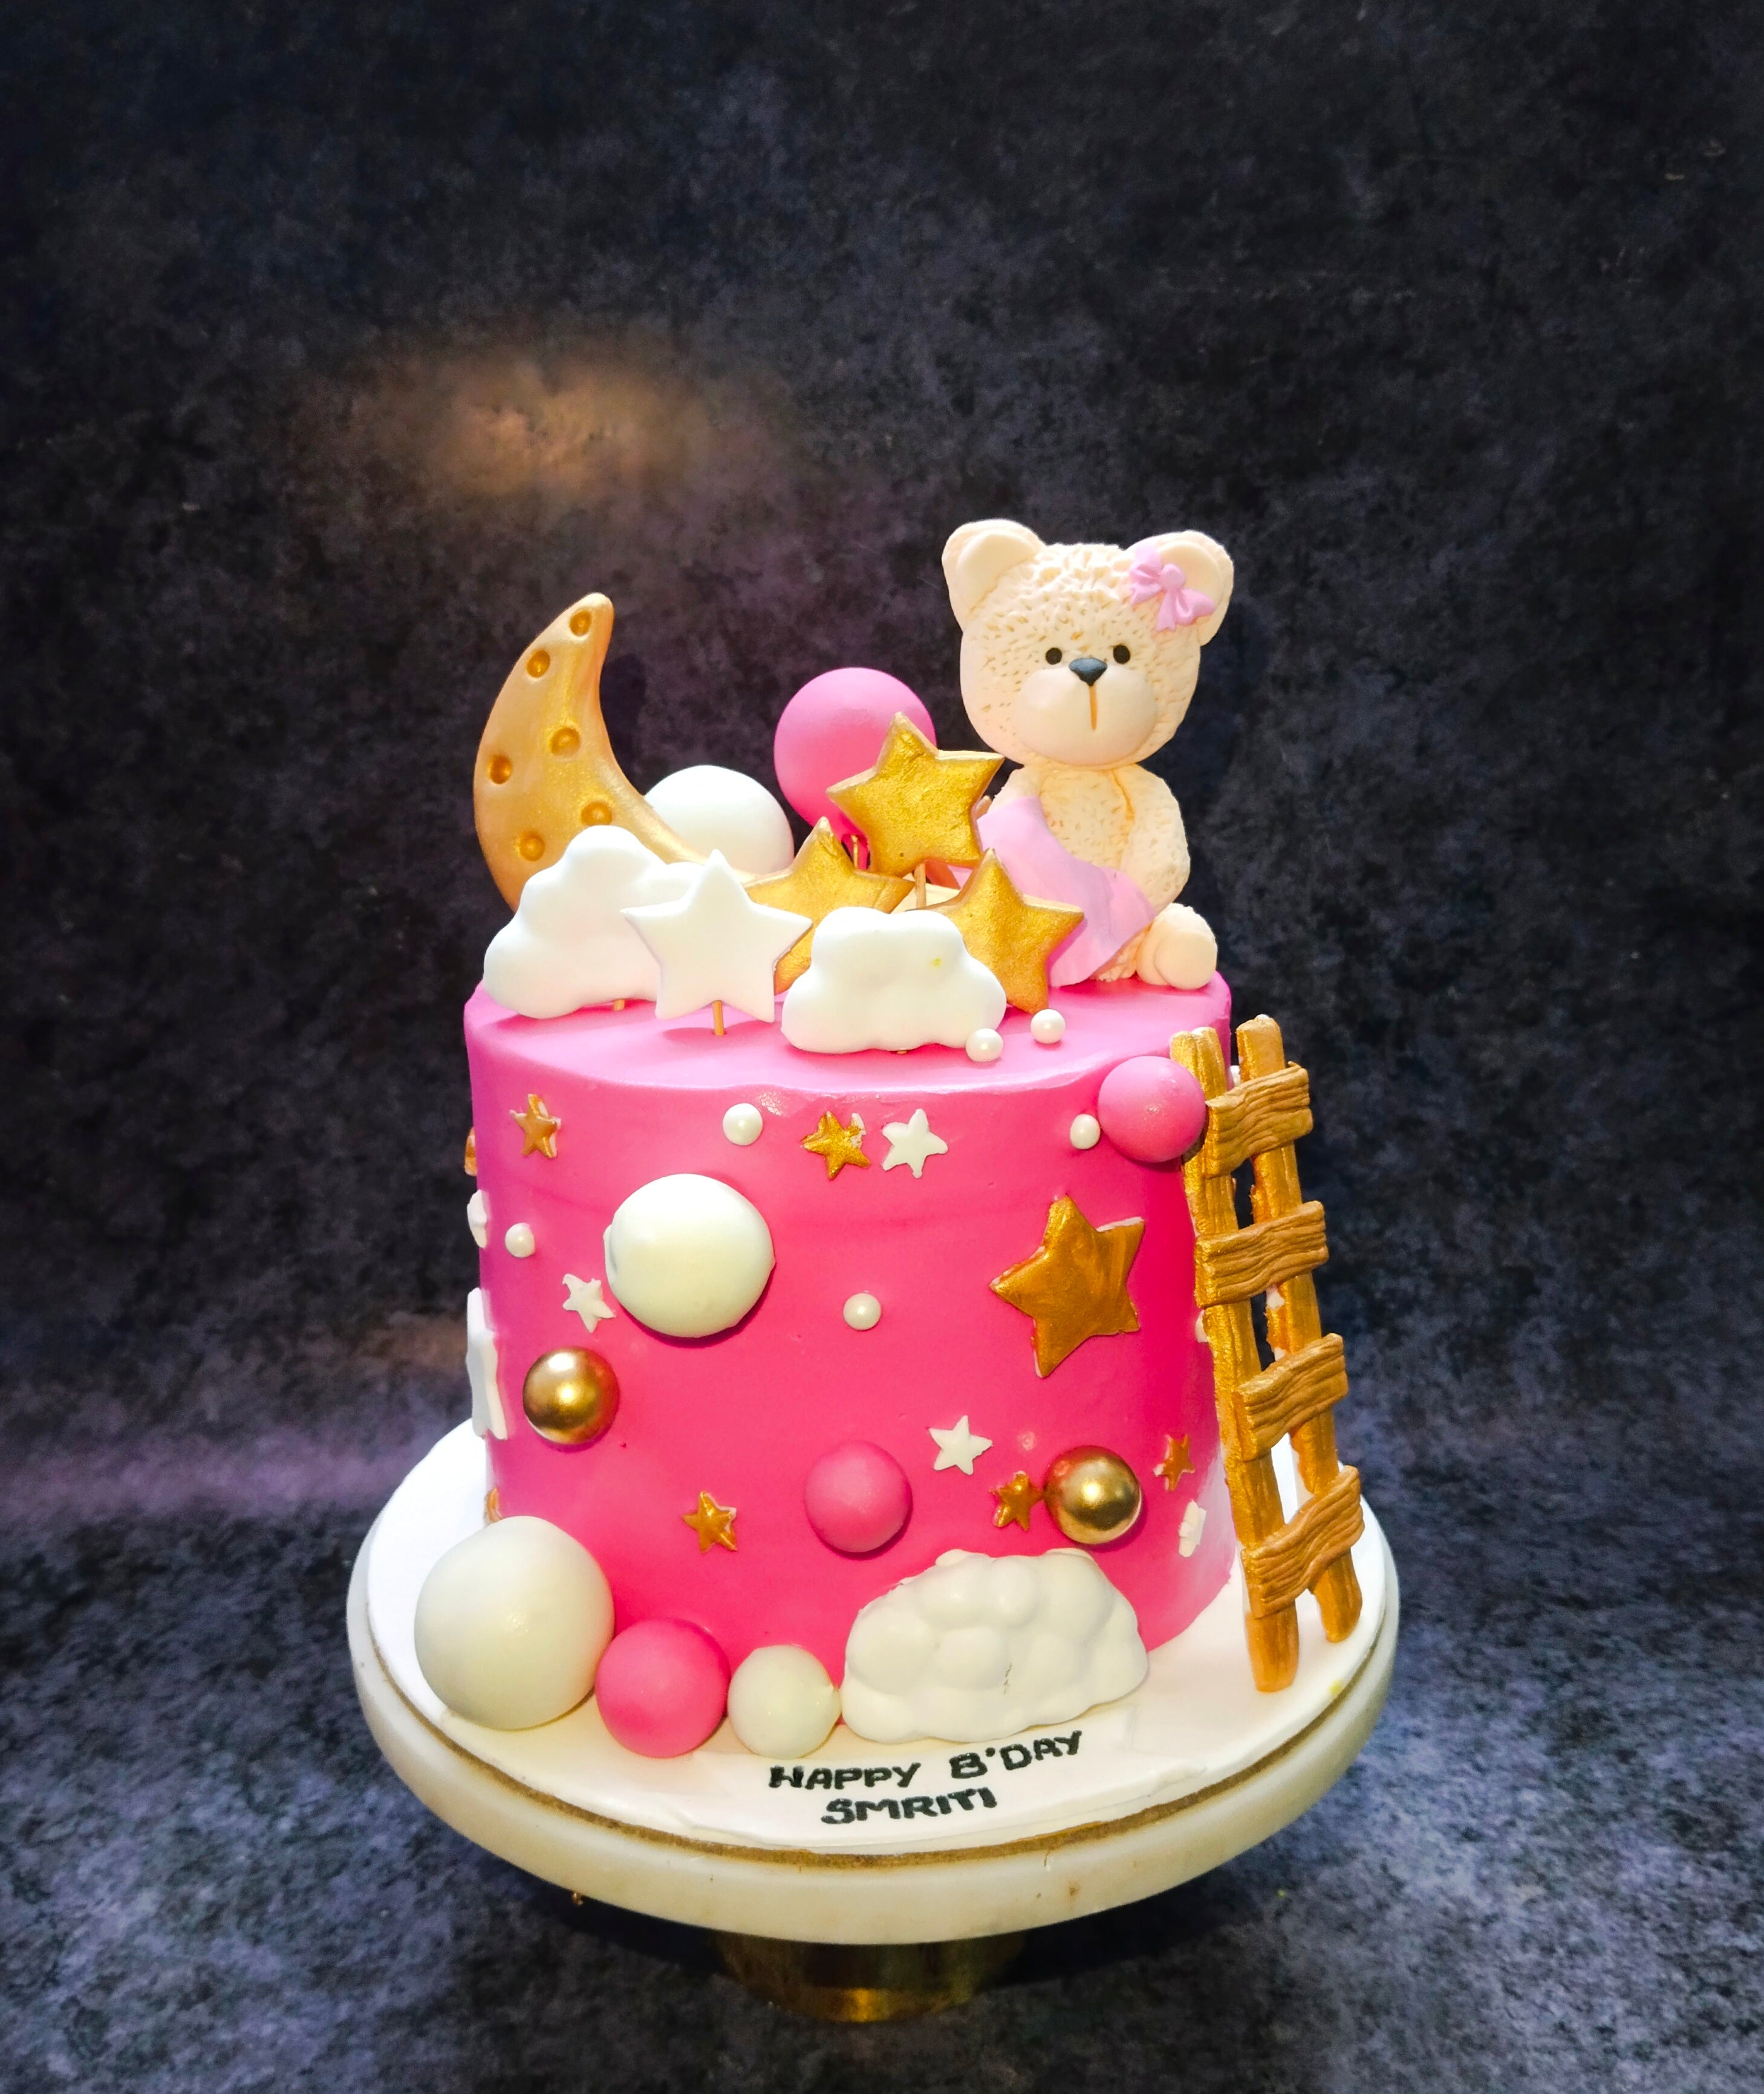 Teddy Bear Cake for Boy - Adorable and Delicious! | Yummy cake